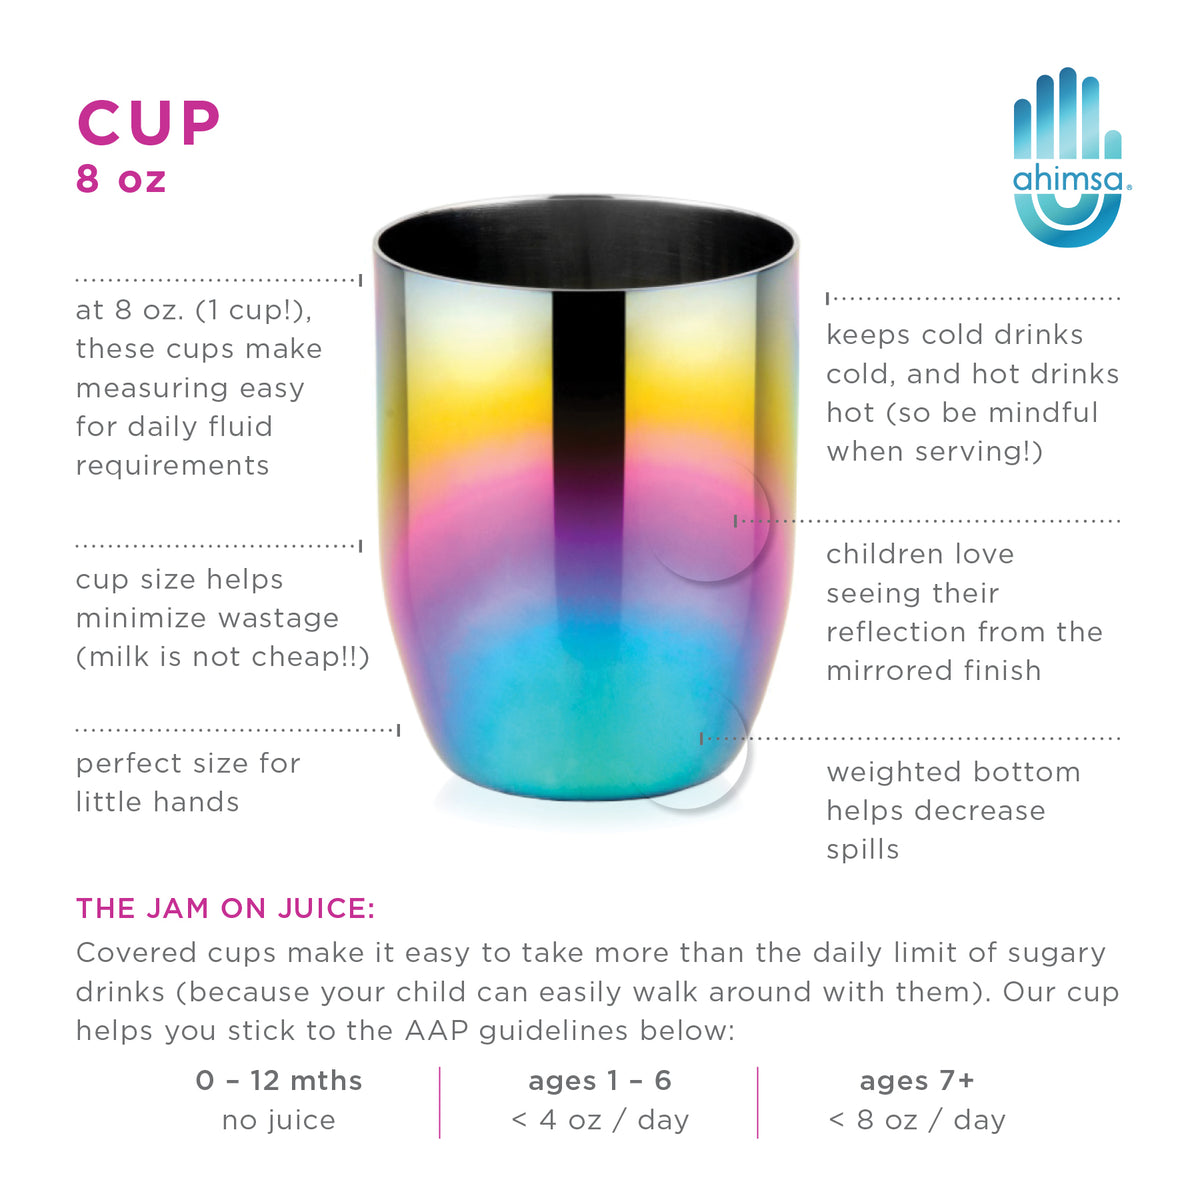 Perfect sized kids cup for small hands, reducing waste and mess